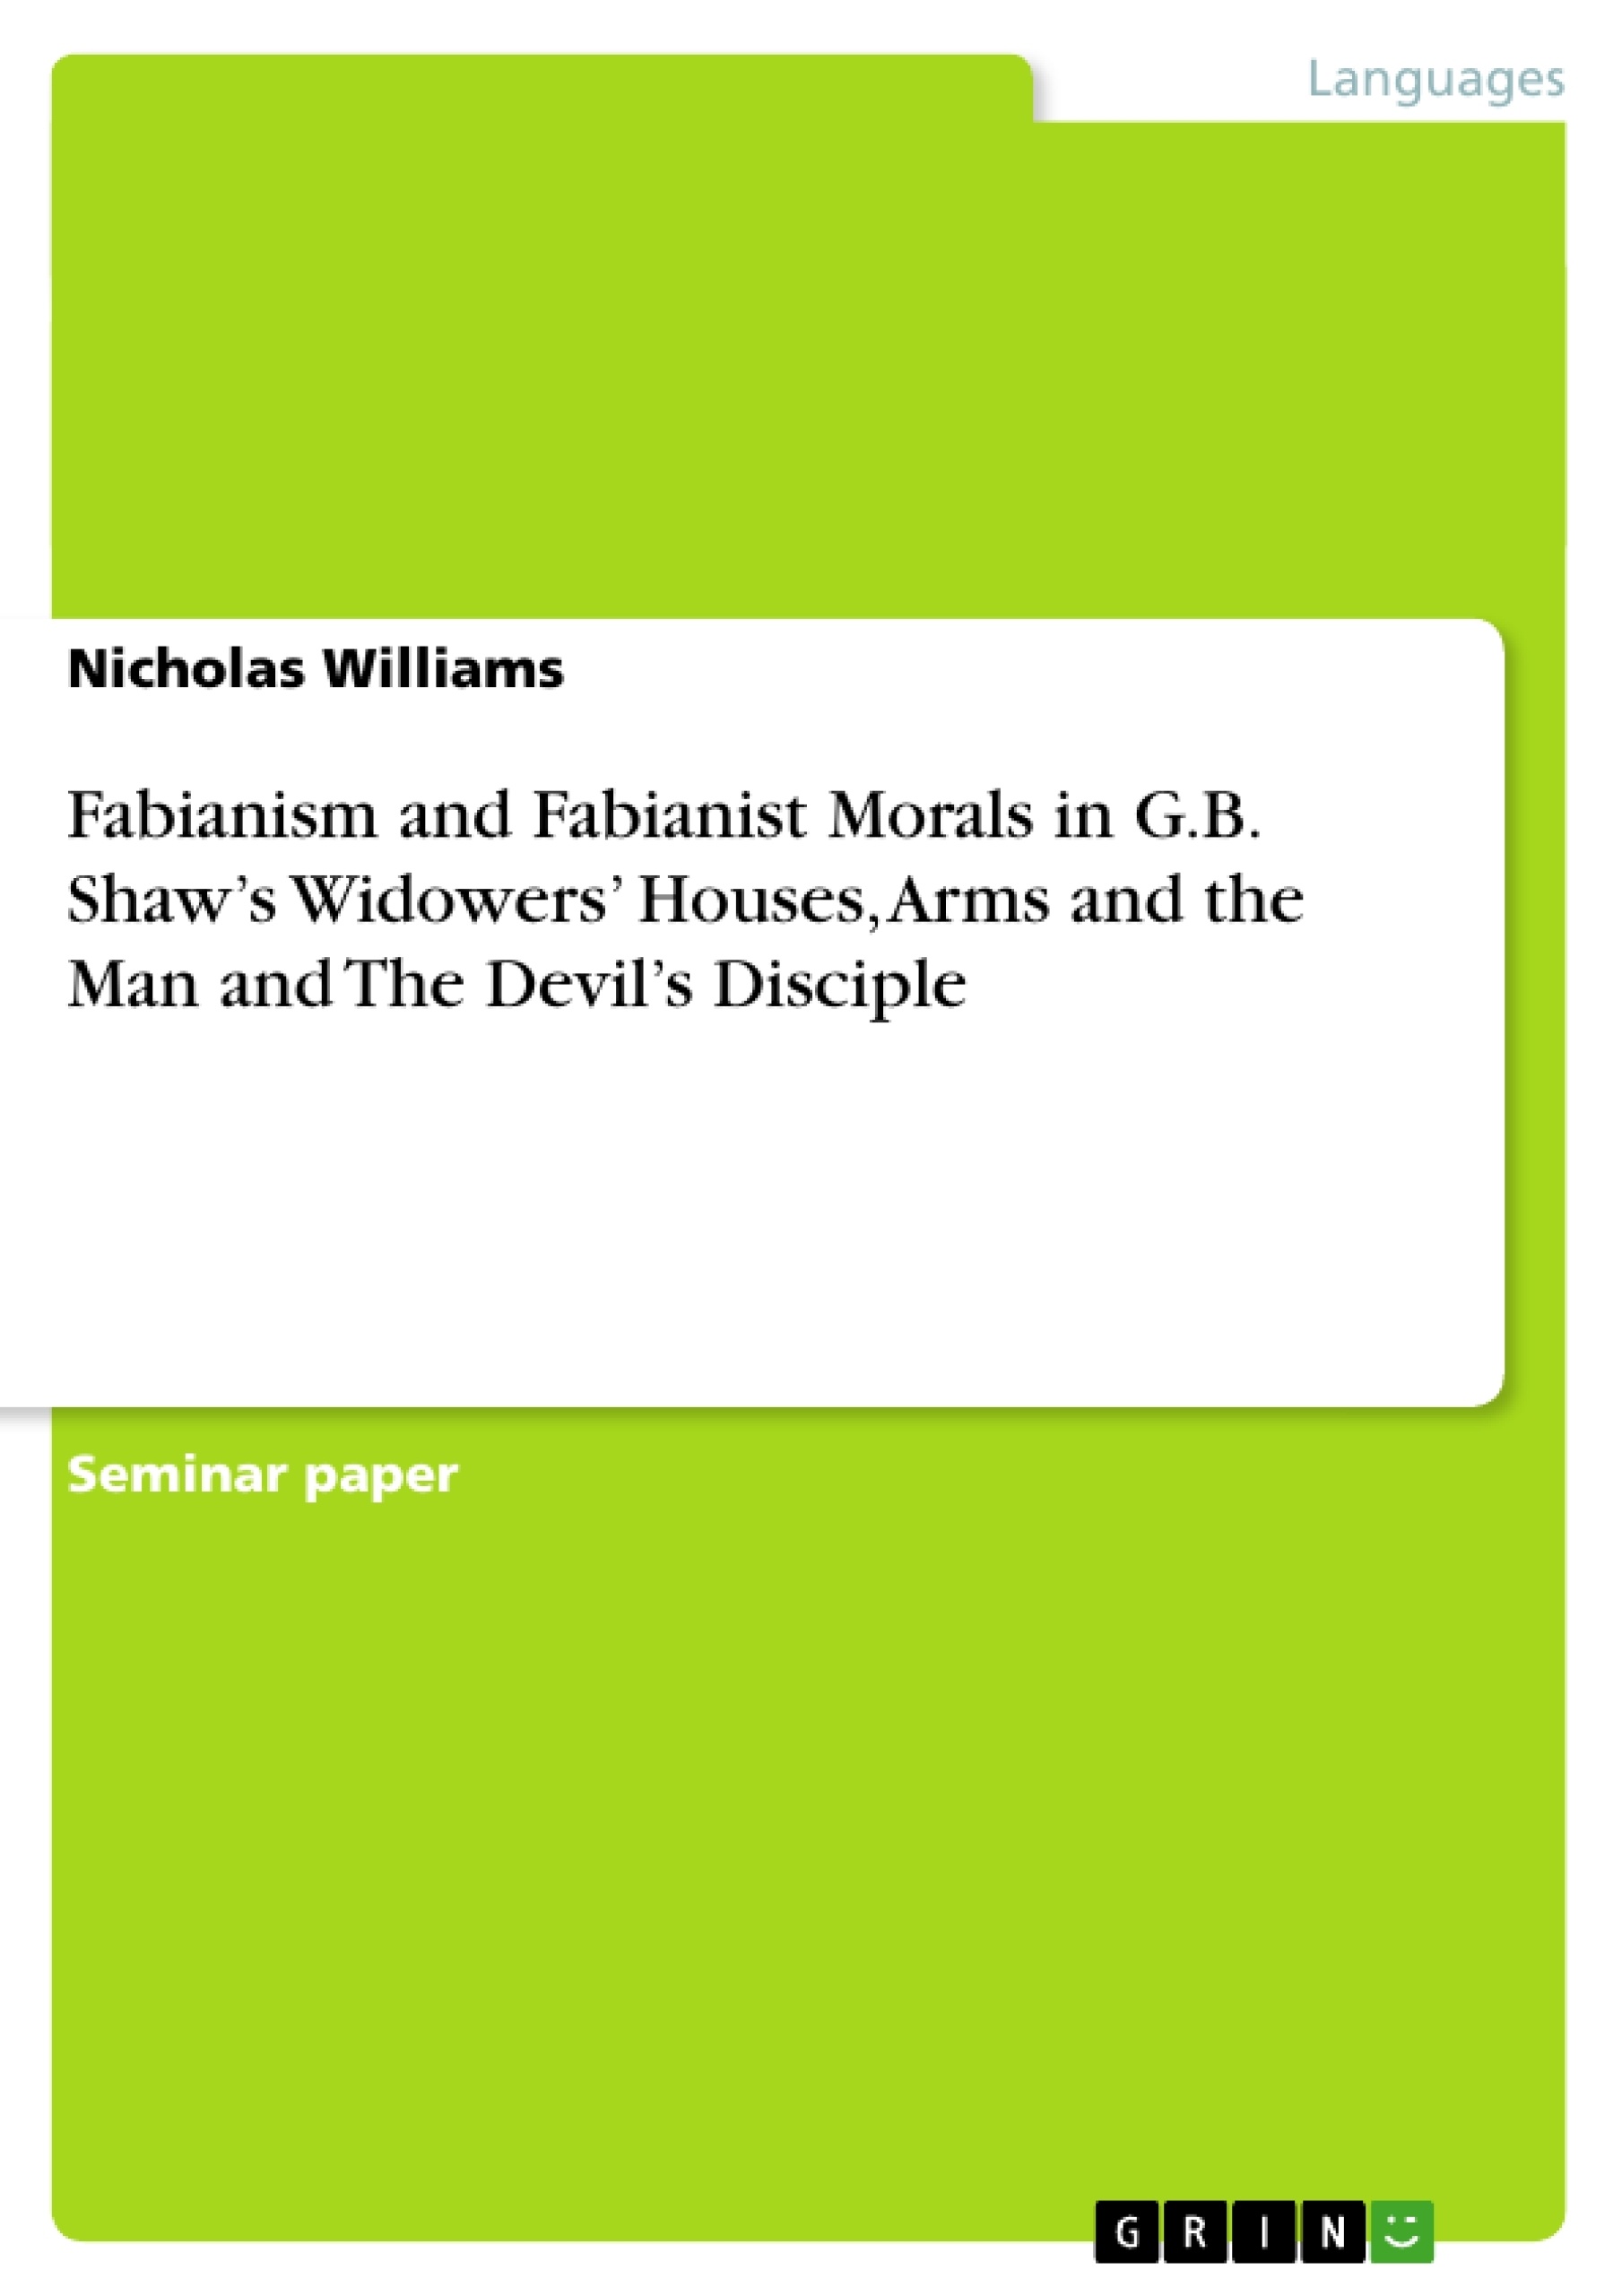 Titel: Fabianism and Fabianist Morals in G.B. Shaw’s Widowers’ Houses, Arms and the Man and The Devil’s Disciple